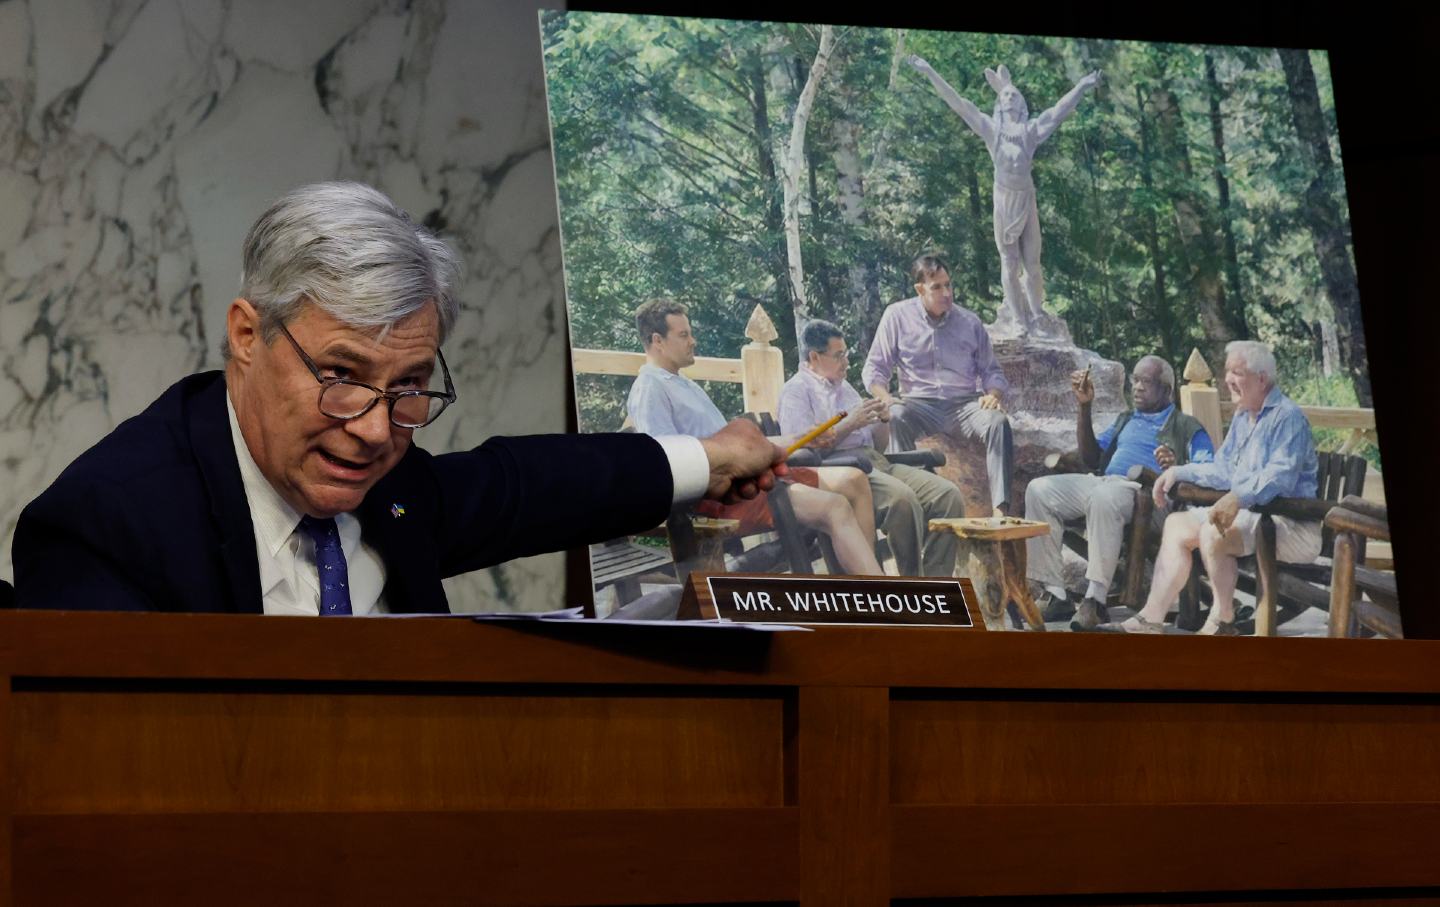 Senate Judiciary Committee member Senator Sheldon Whitehouse (D-R.I.) displays a copy of a painting featuring Supreme Court Associate Justice Clarence Thomas alongside Harlan Crow and other conservative friends during a hearing on Supreme Court ethics reform.